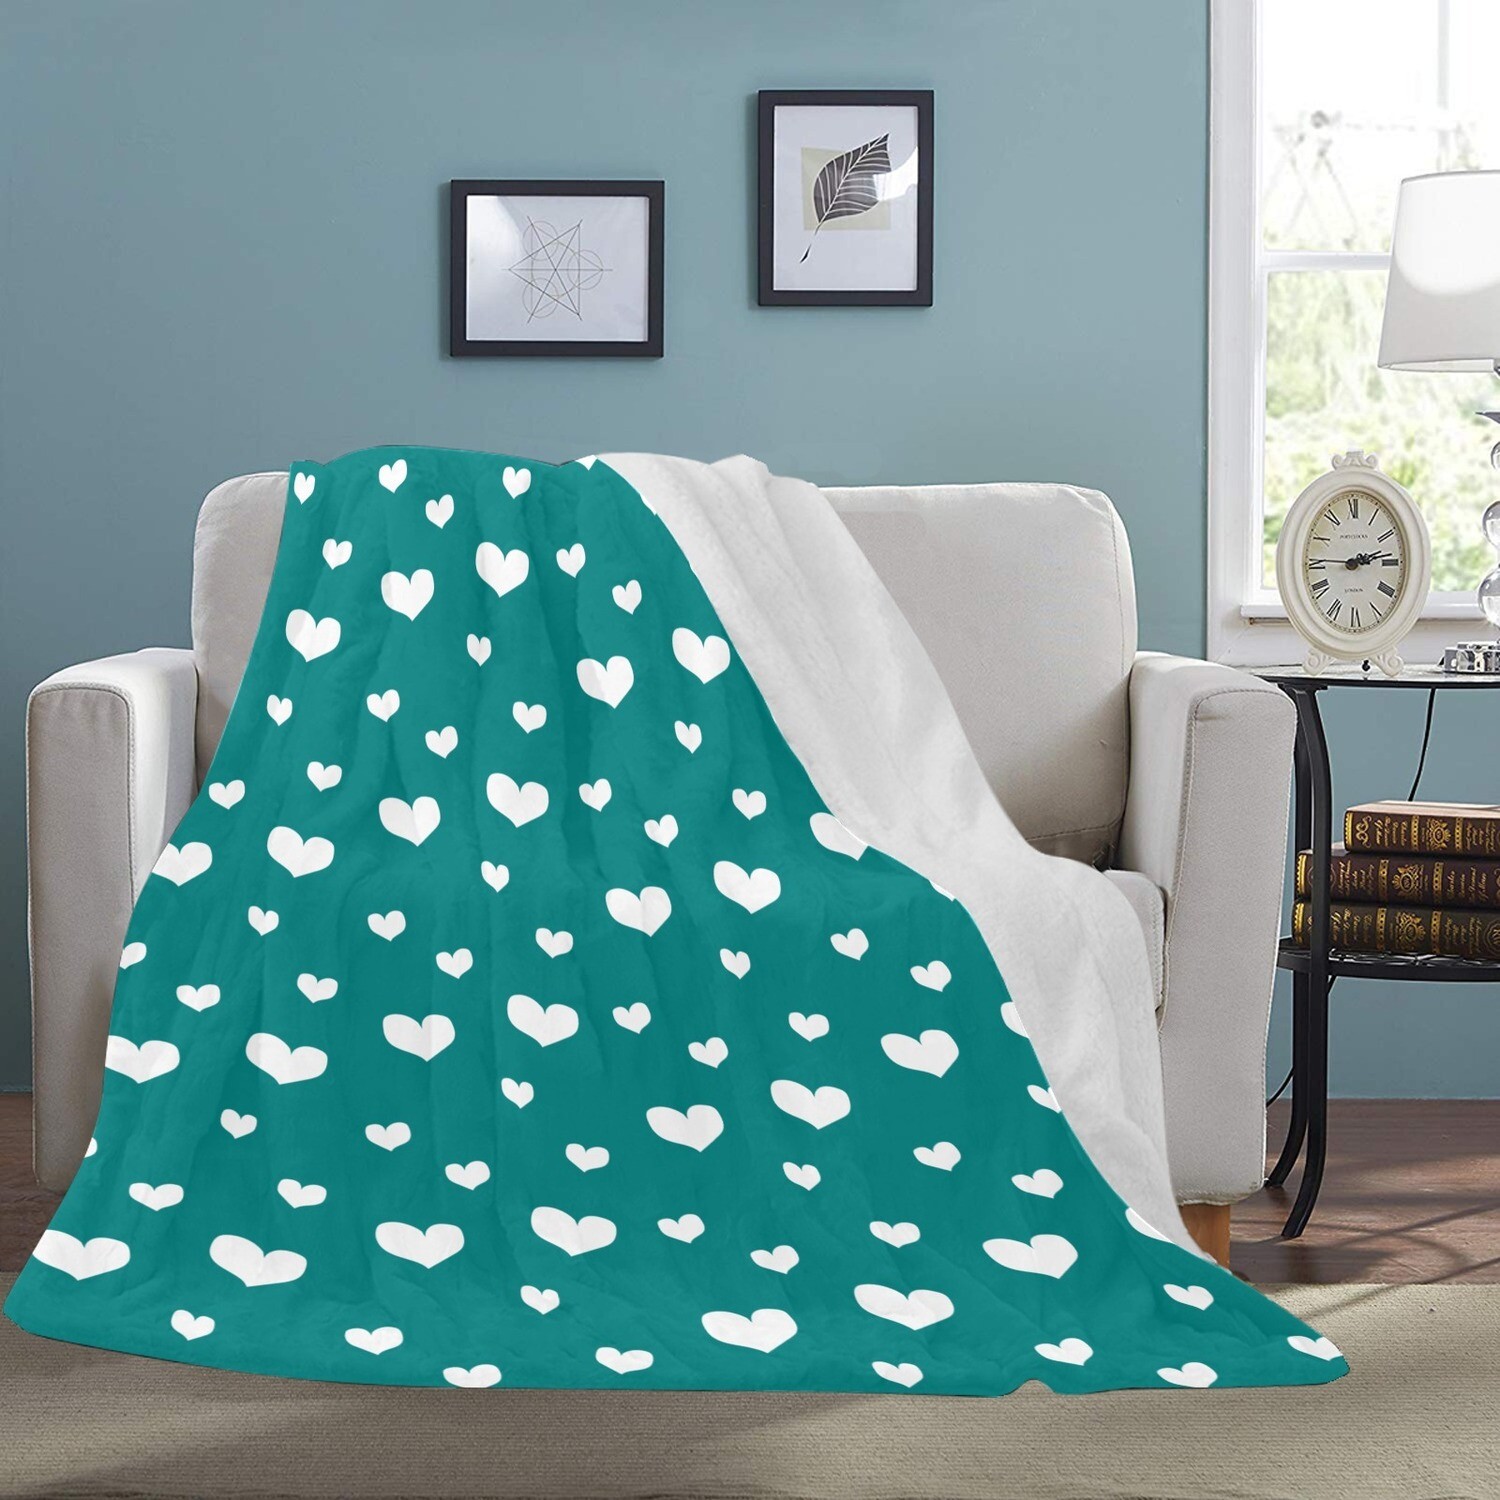 🤴🏽👸🏽💕Large Ultra-Soft Micro Fleece Blanket Valentine white hearts on teal, gift, gift for her, gift for him, gift for them, 70"x80"